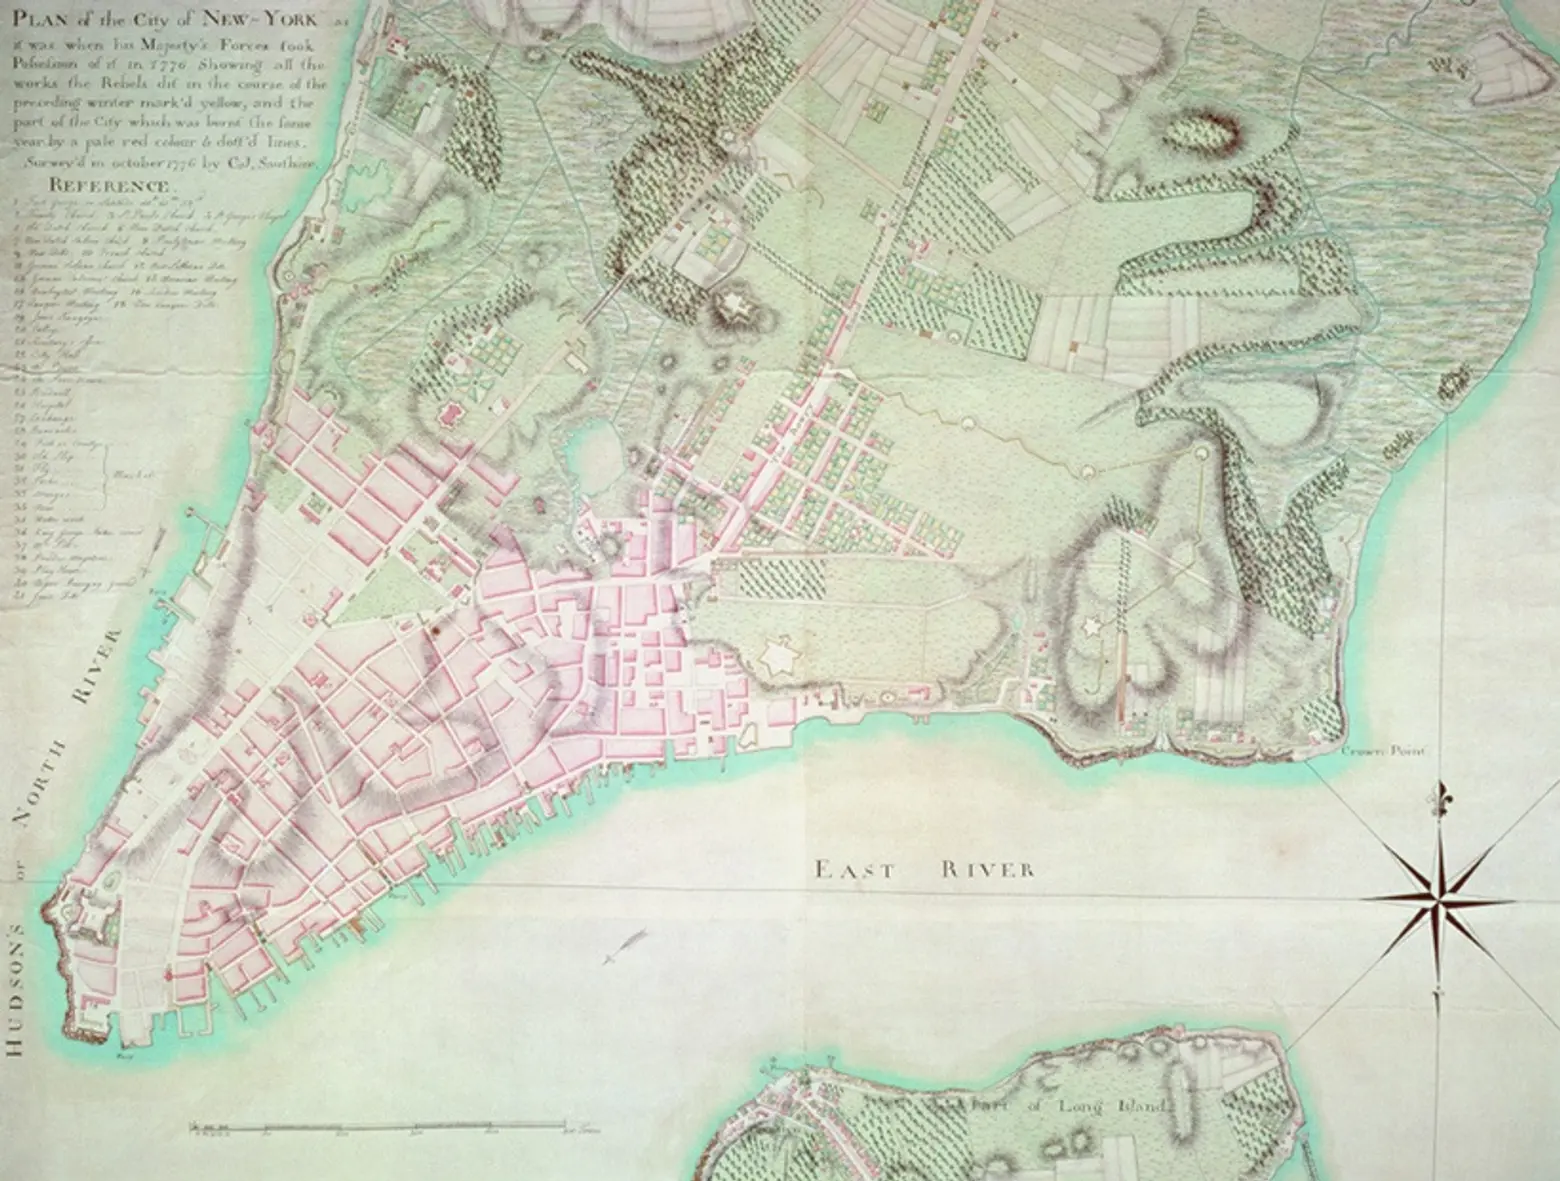 On this day in 1645, a freed slave became the first non-Native settler to own land in Greenwich Village